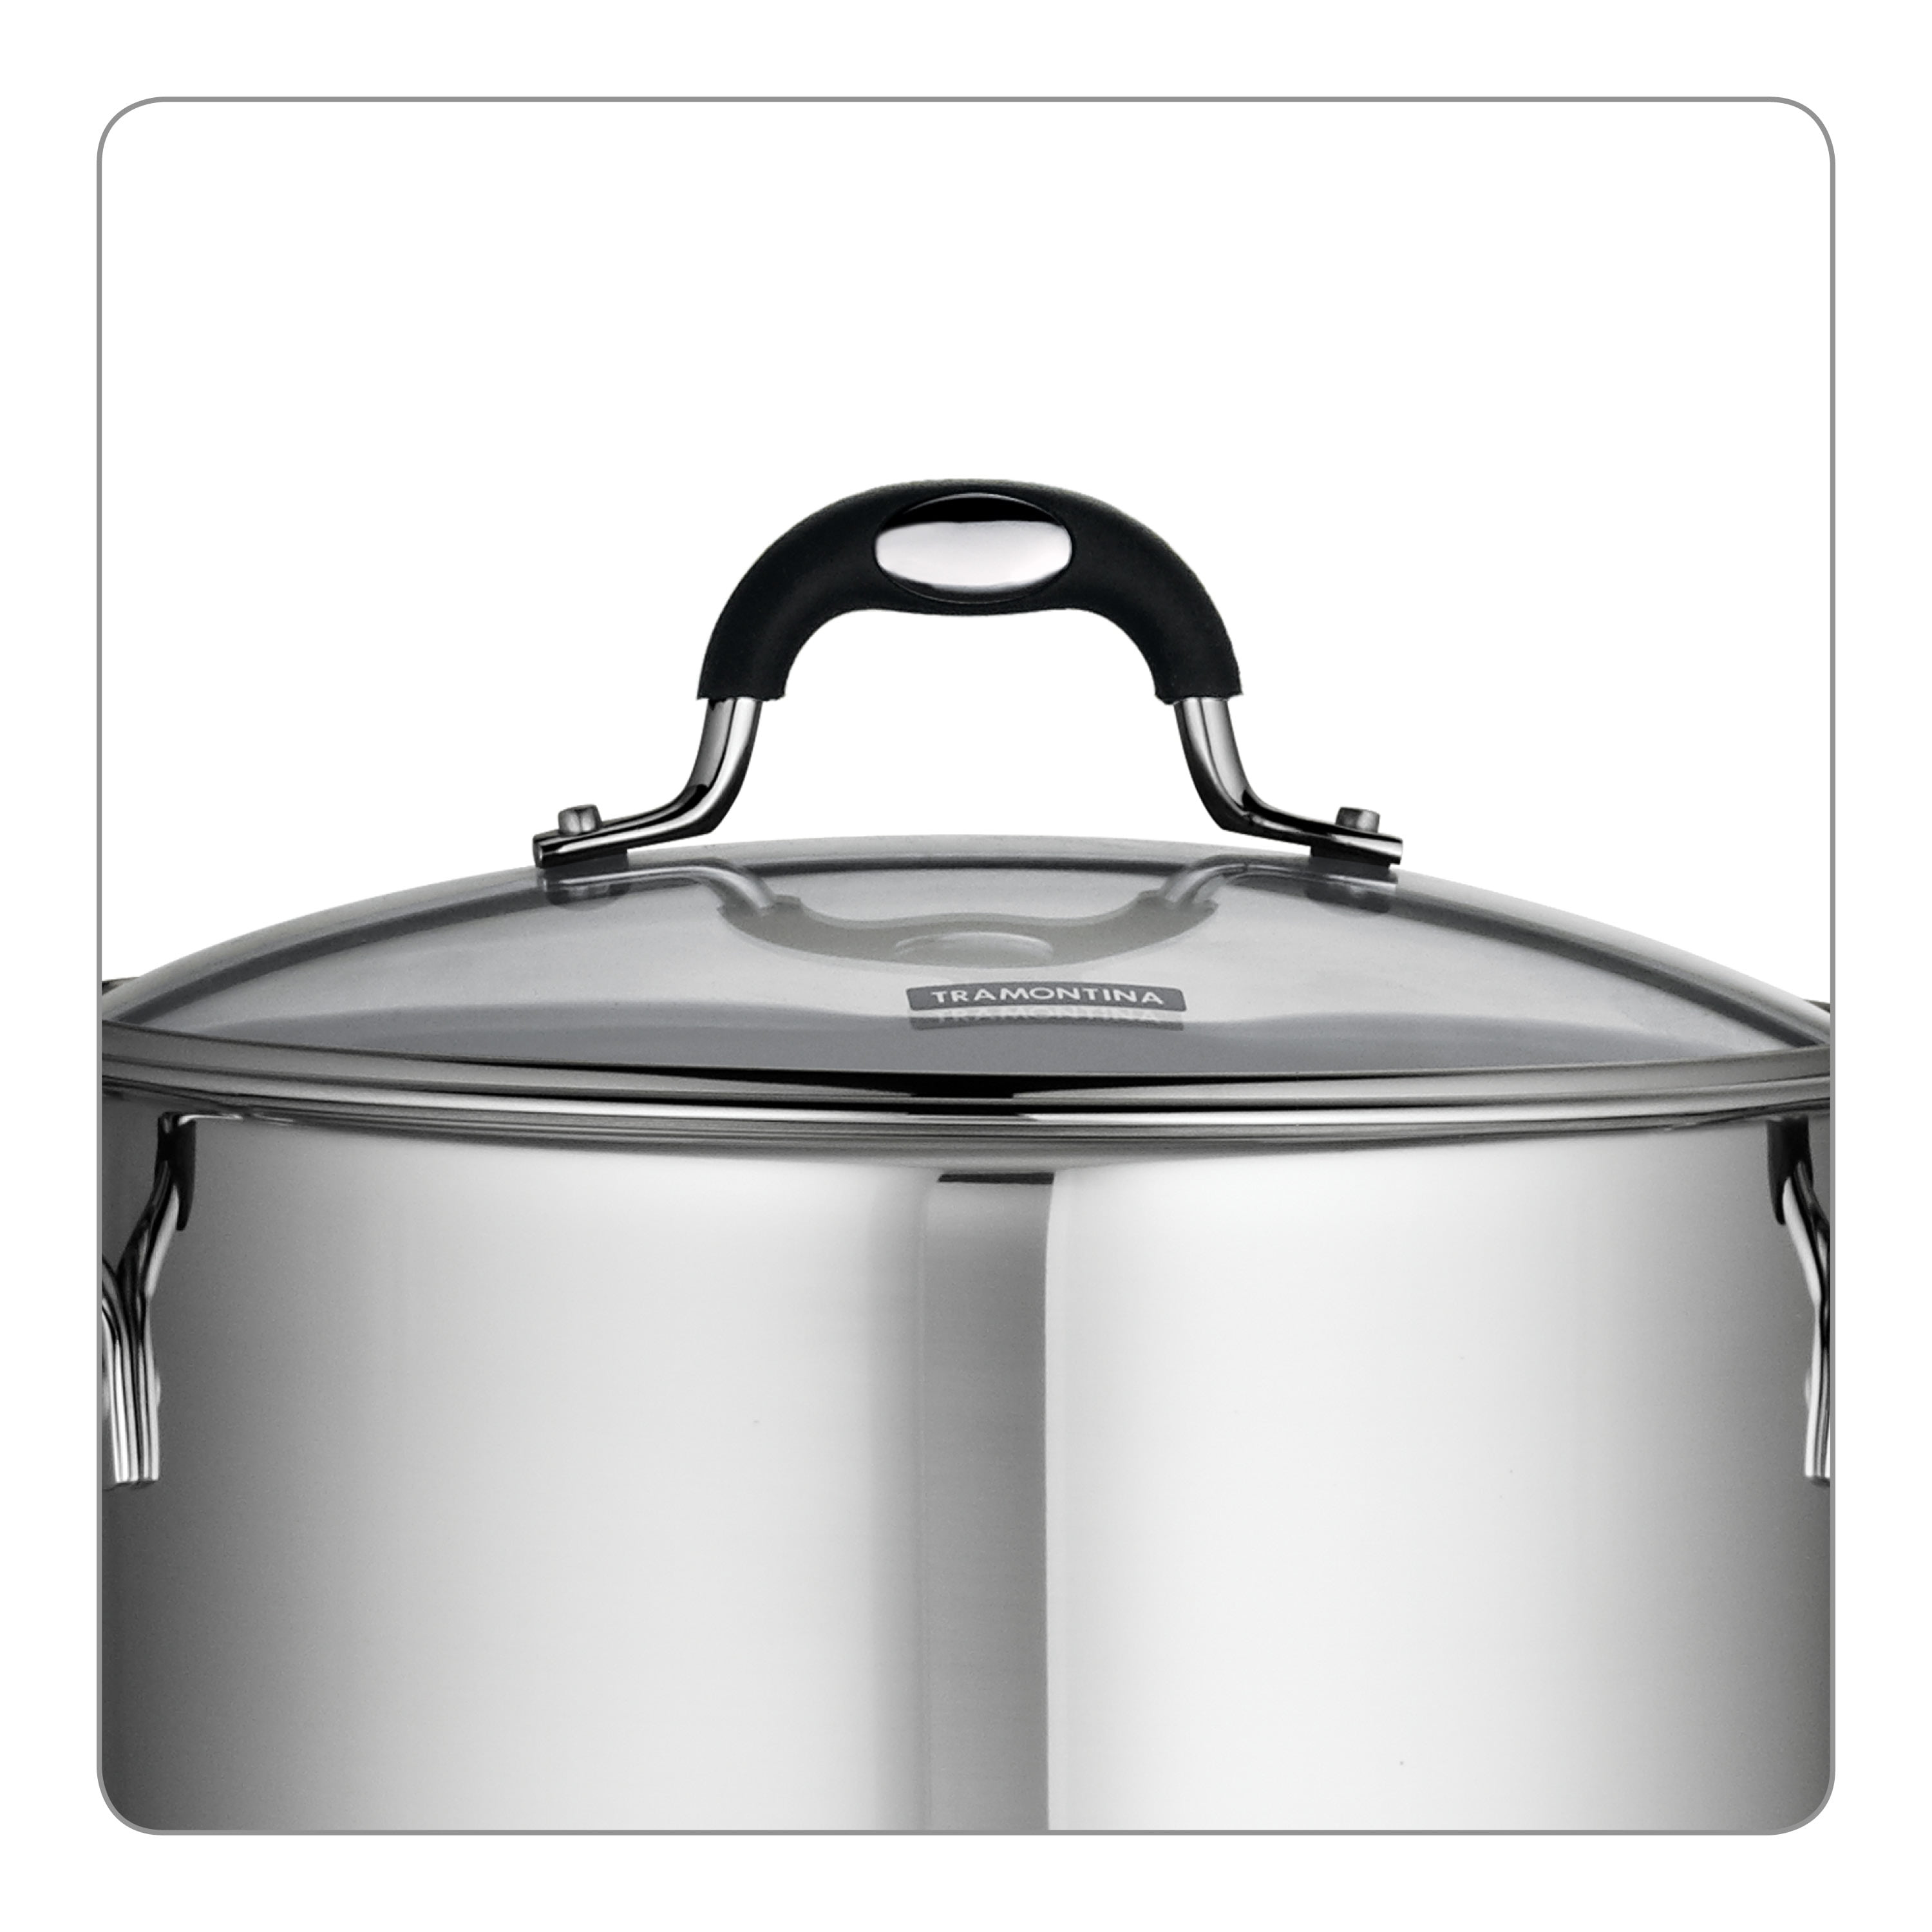 Tramontina Gourmet Prima 8 qt. Stainless Steel Stock Pot with Lid  80101/011DS - The Home Depot